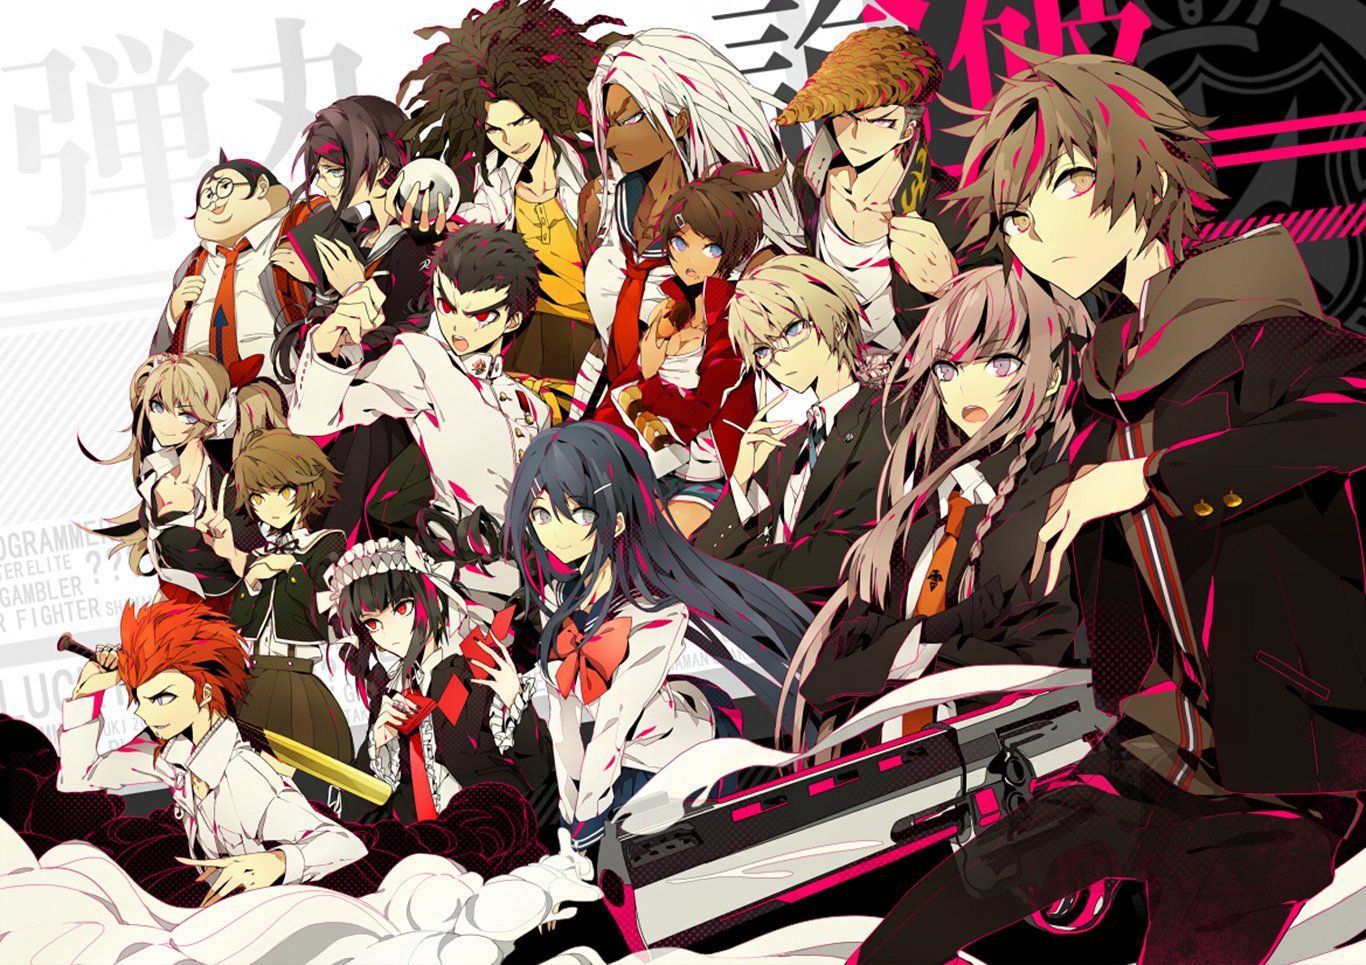 Danganronpa characters with a bloodstained background - Danganronpa